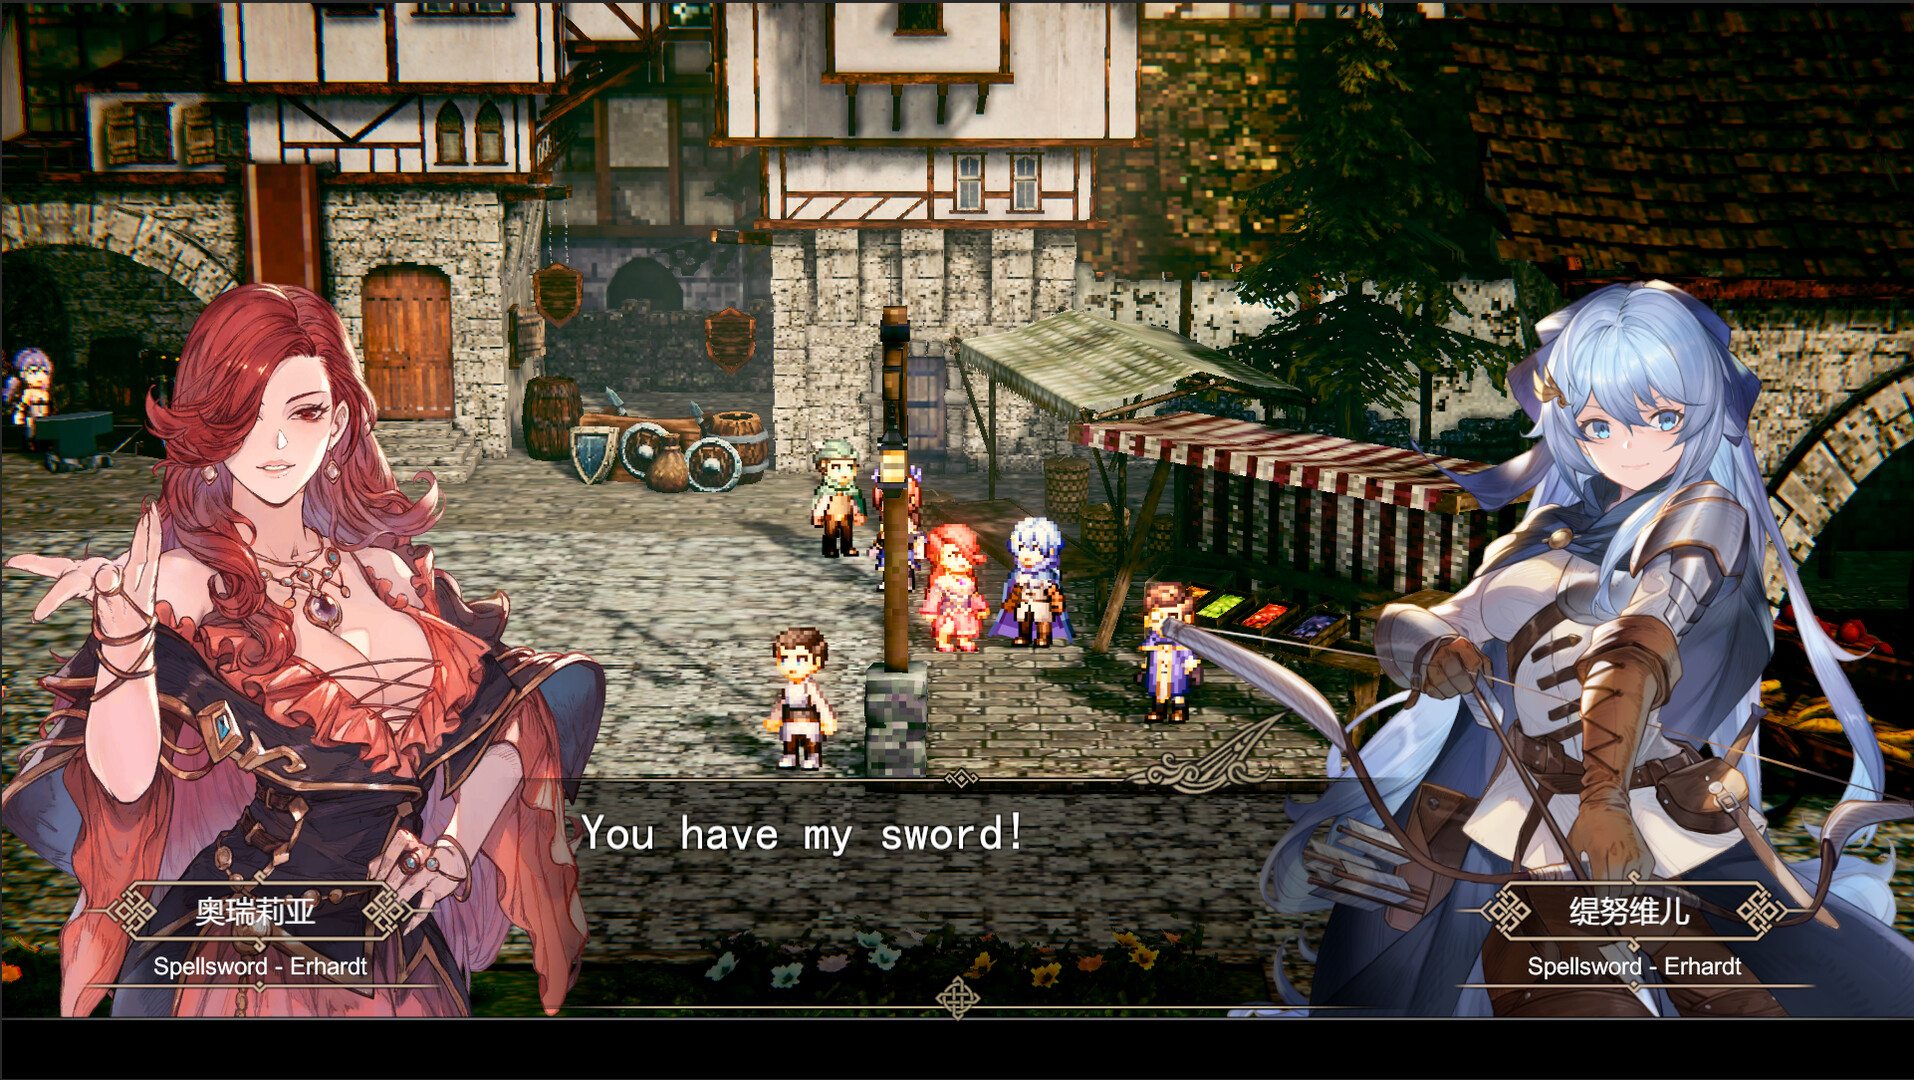 HD pixelated throwback RPG The Legend of Contraria announced